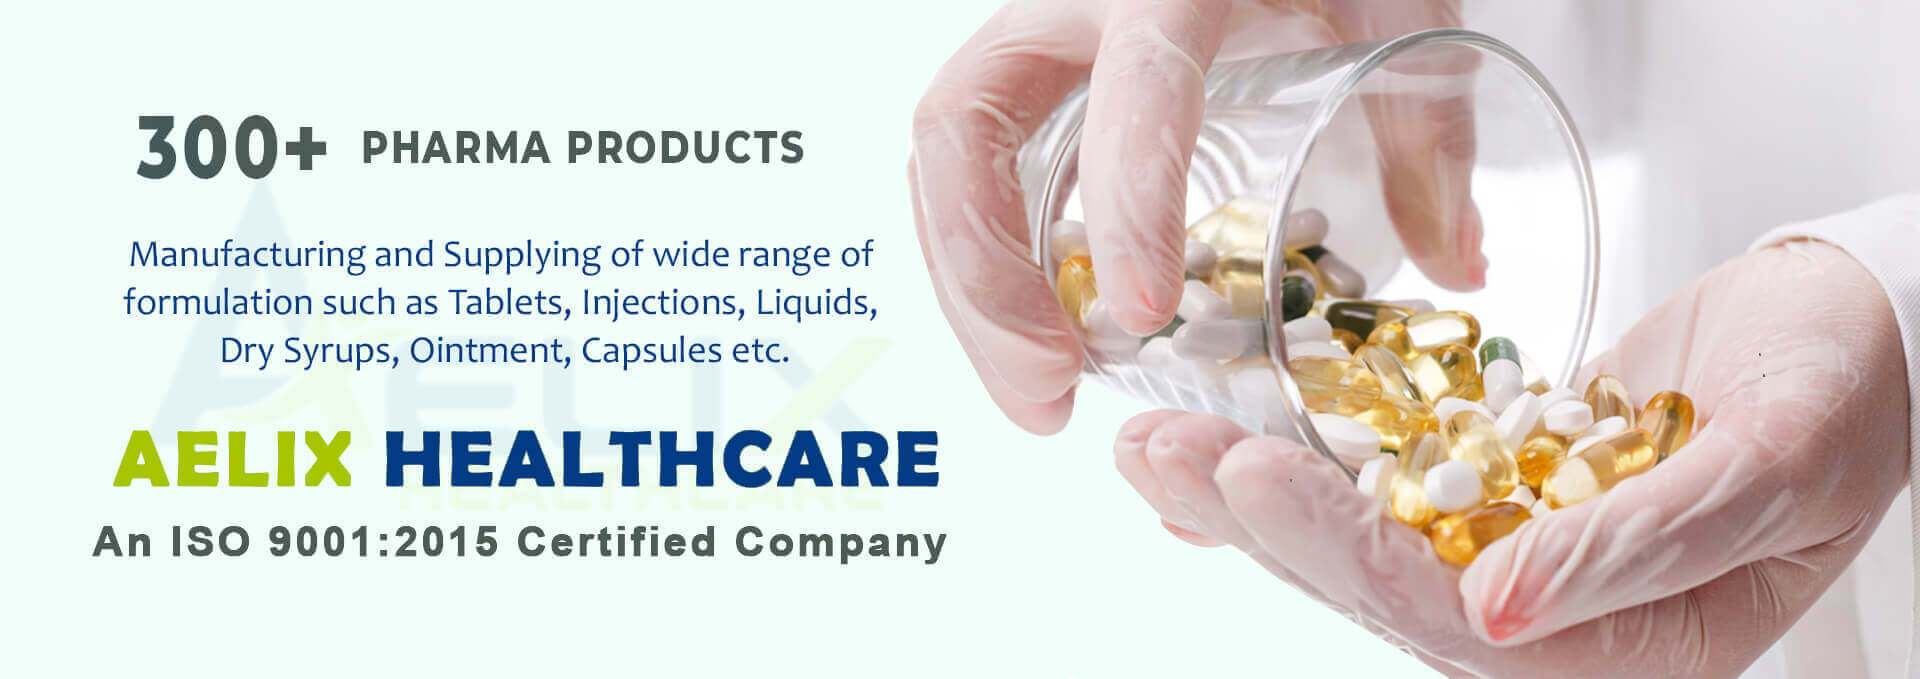 Aelix Healthcare ASO 9001:2015 Certifited Company